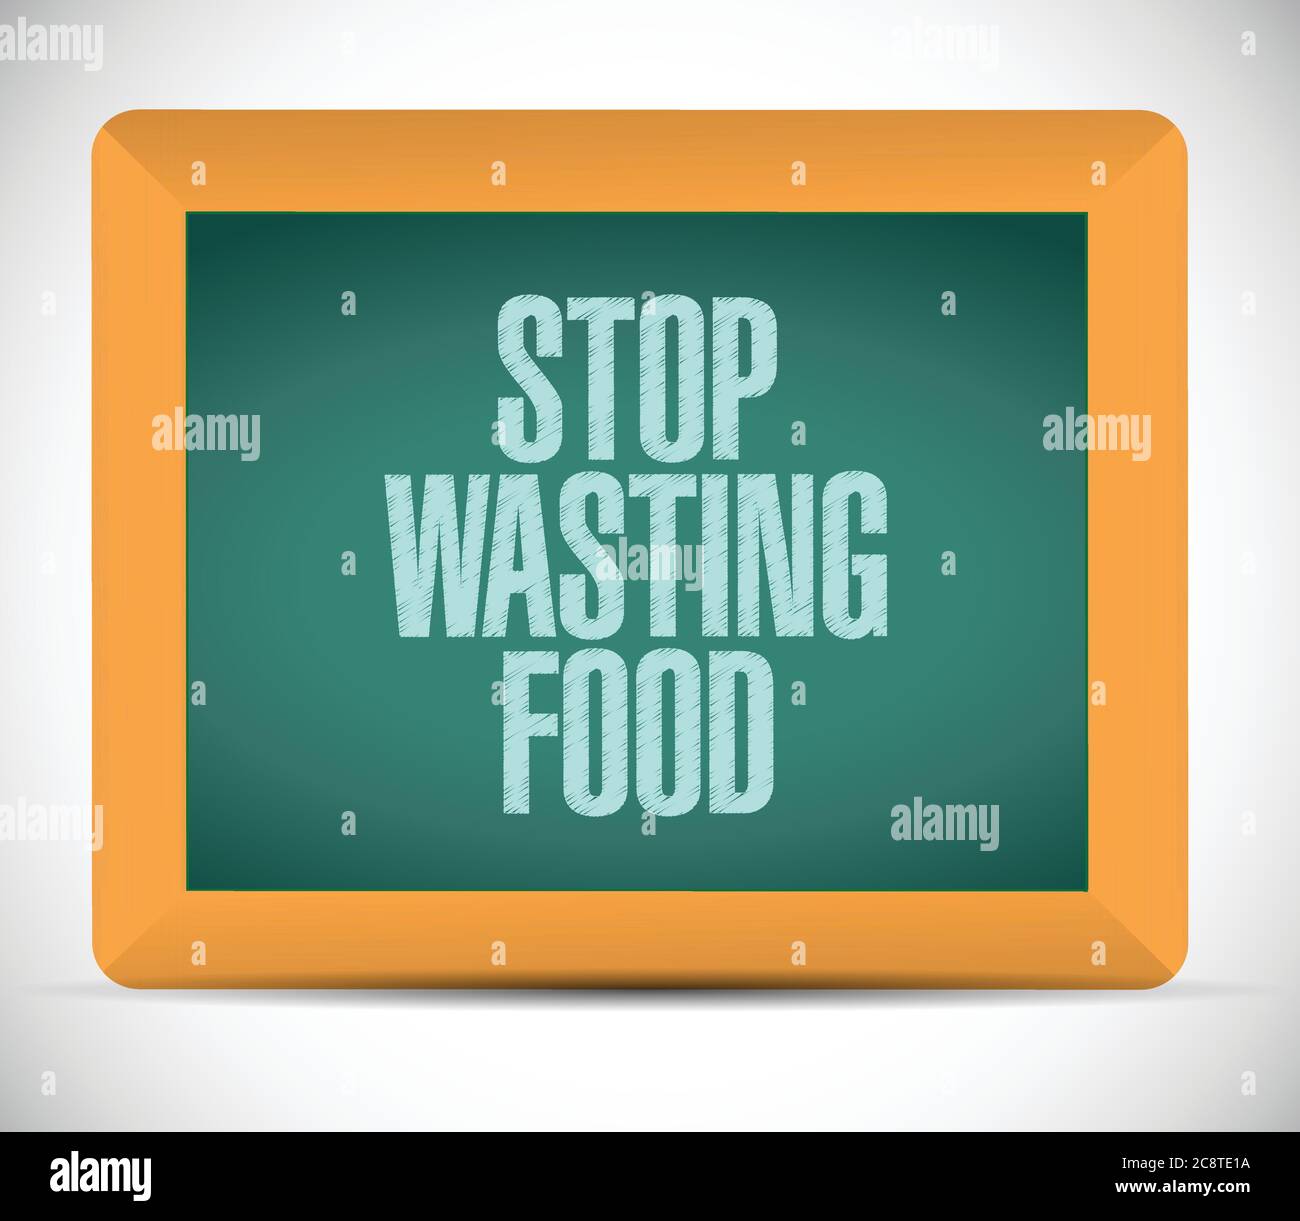 Stop wasting food message on a board. illustration design over a white background Stock Vector